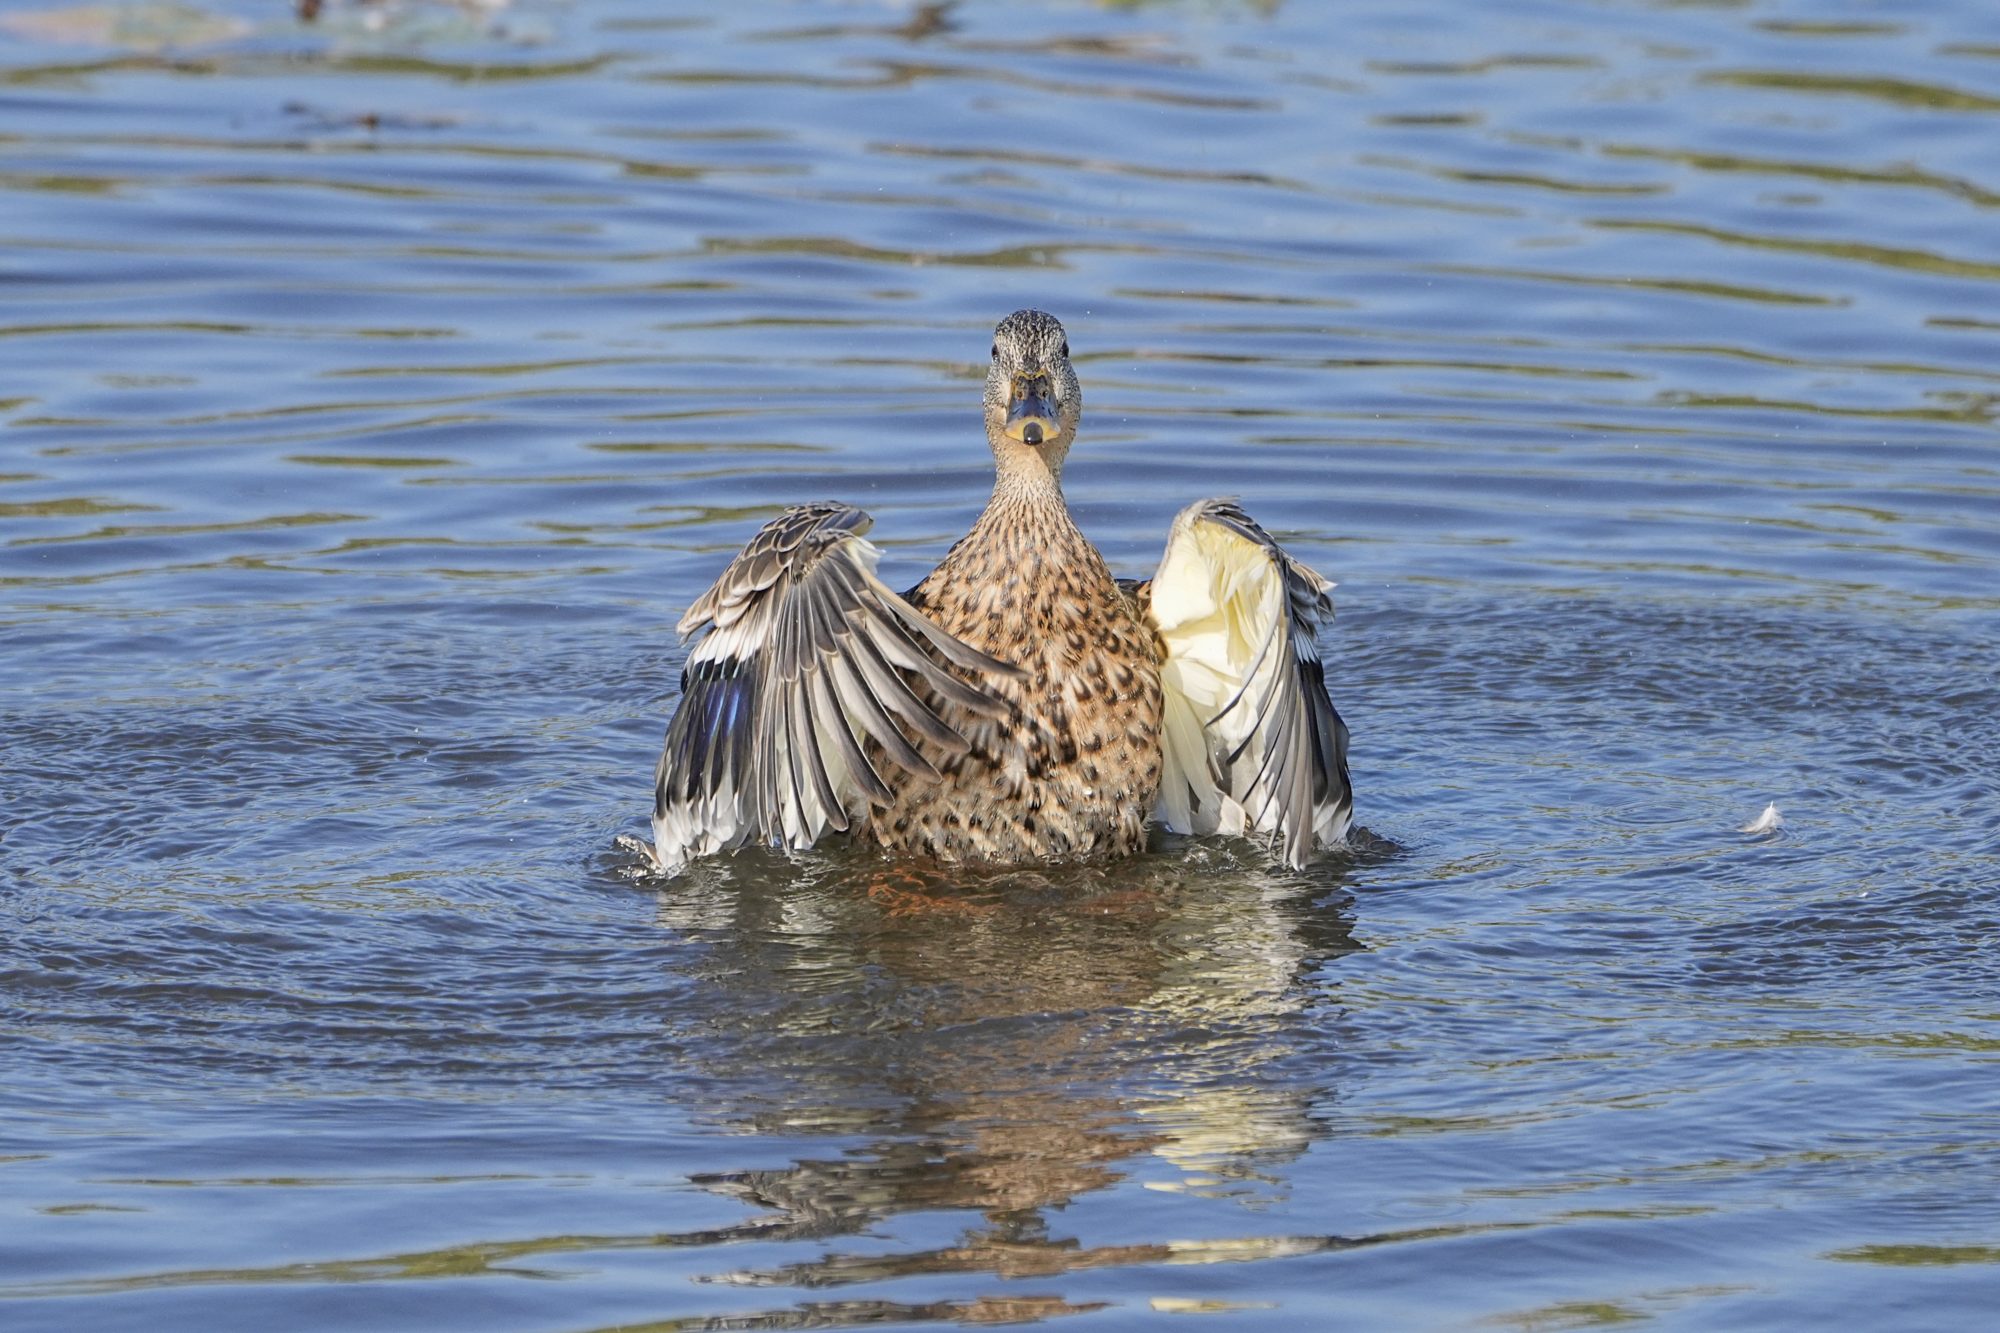 A female Wood Duck is in the water, flapping her wings